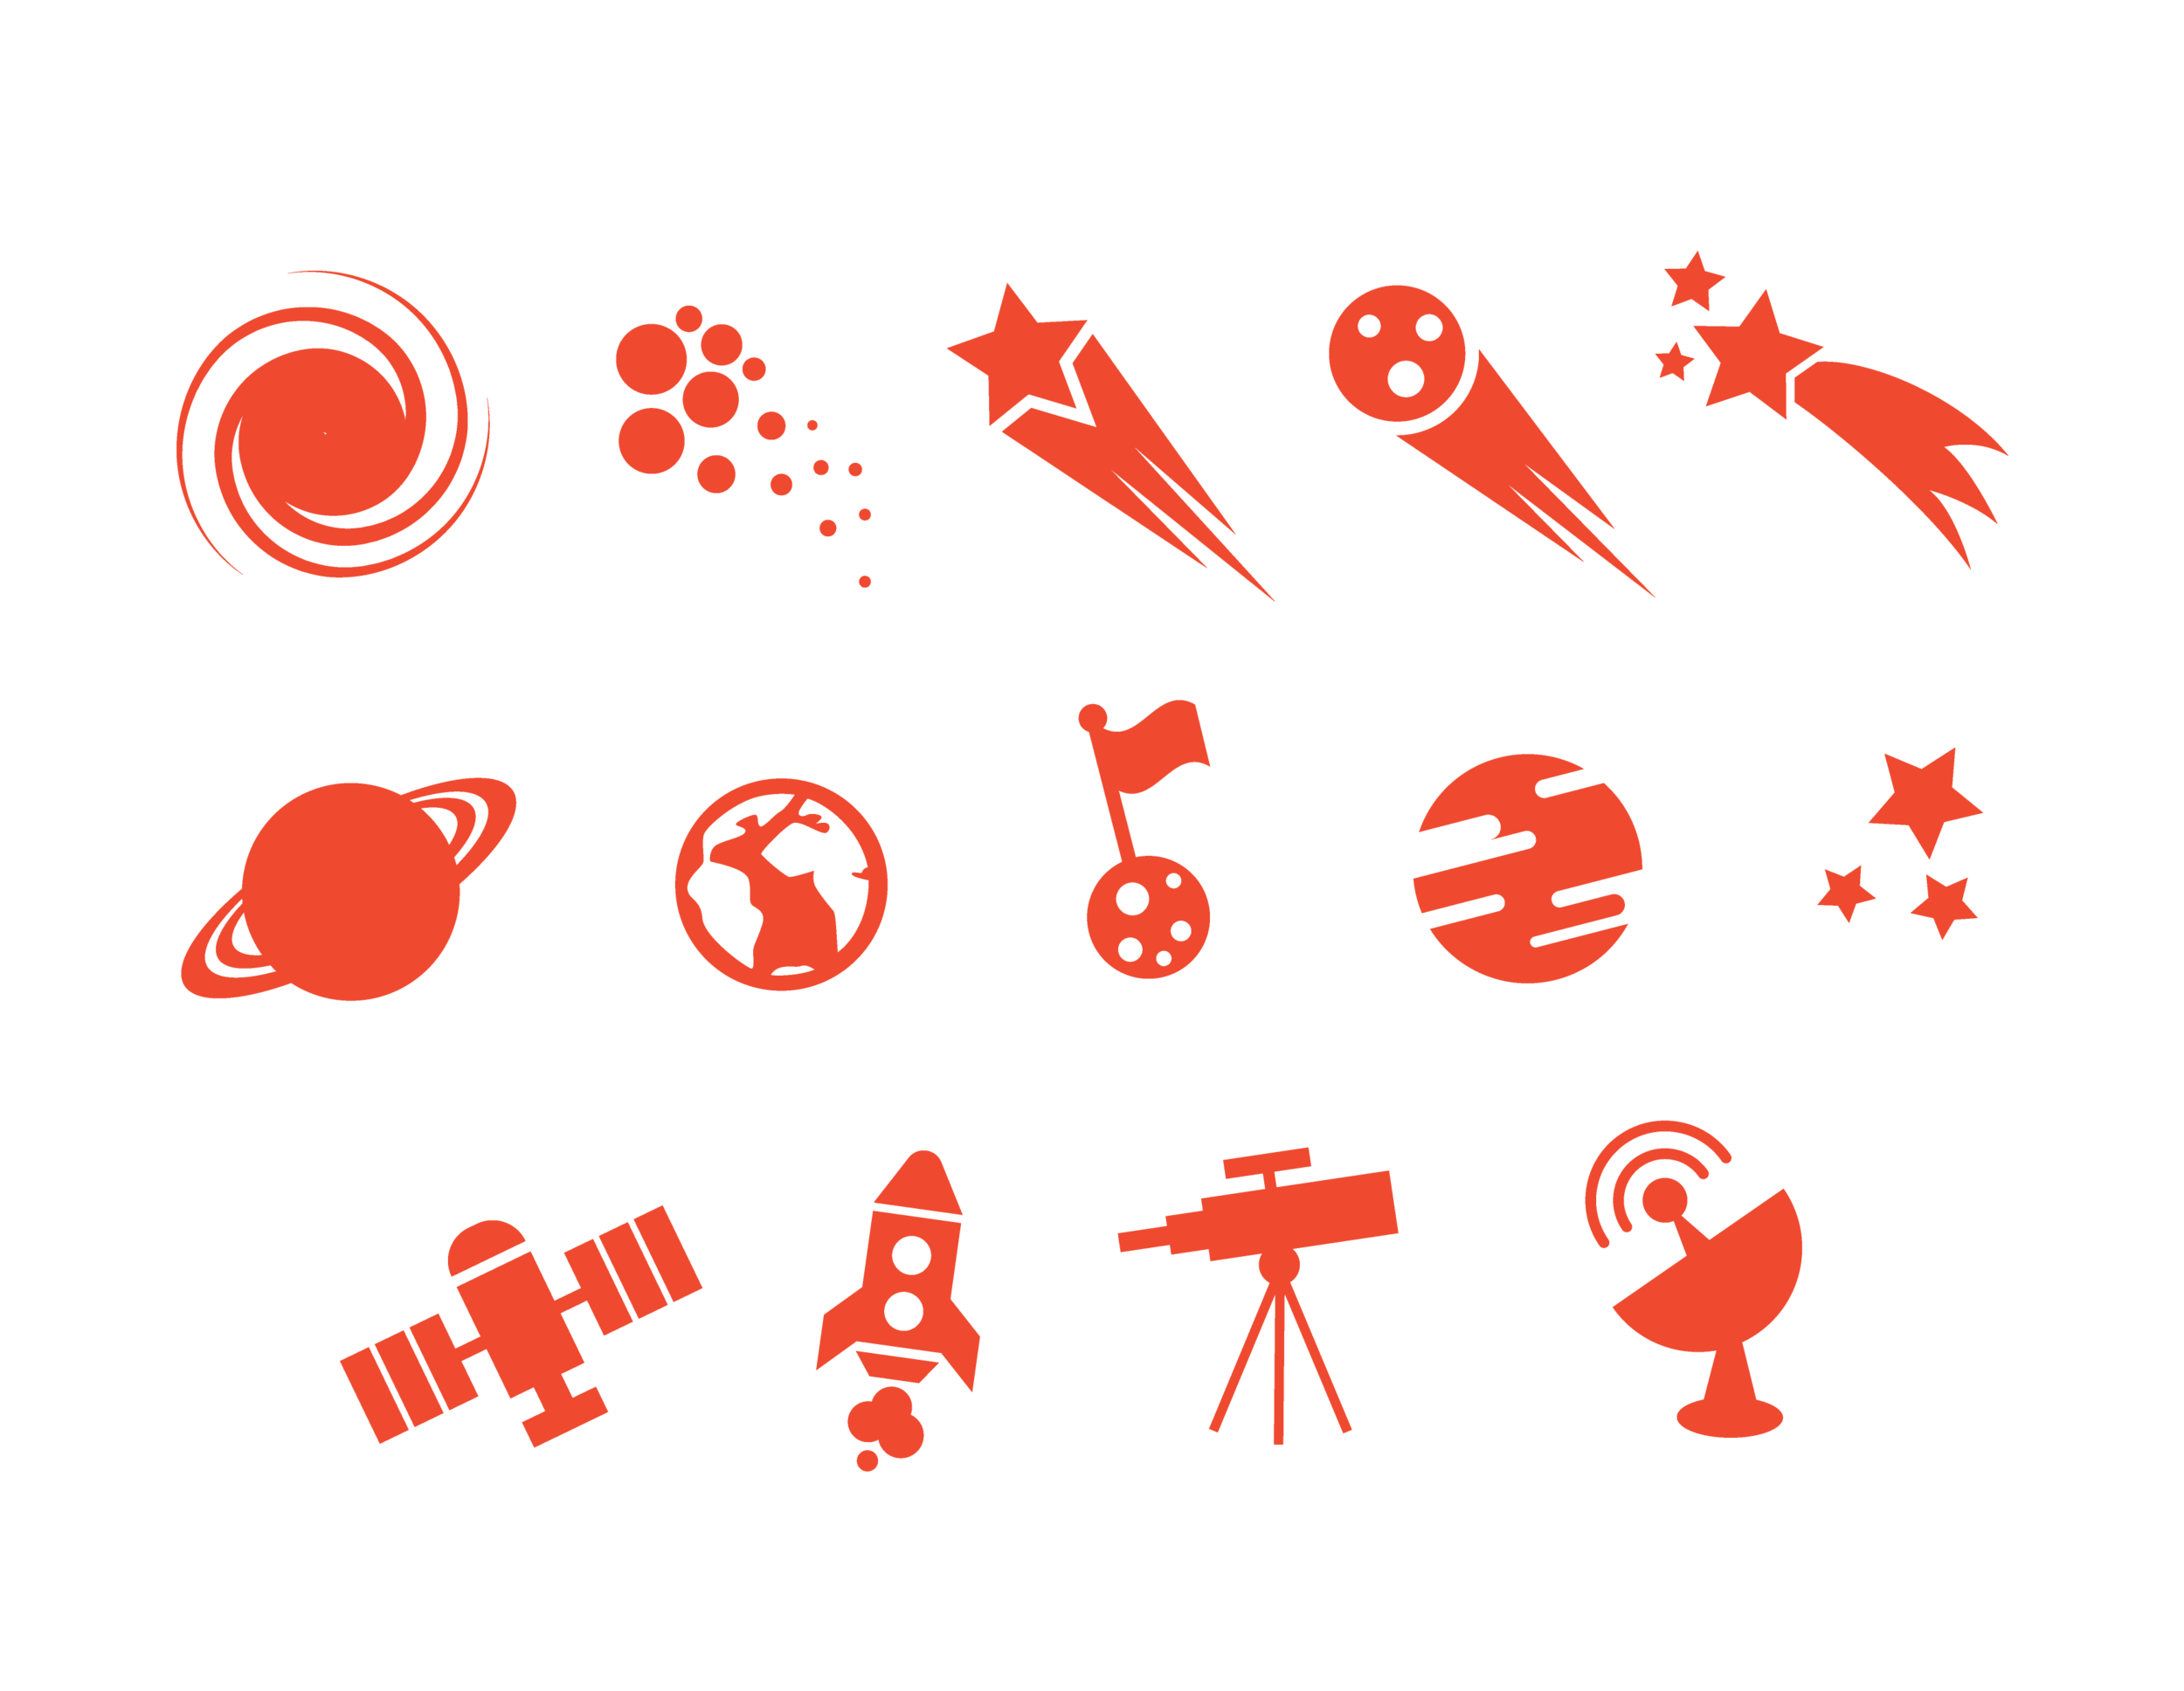 SEUSS_SPACE_ICONS.png